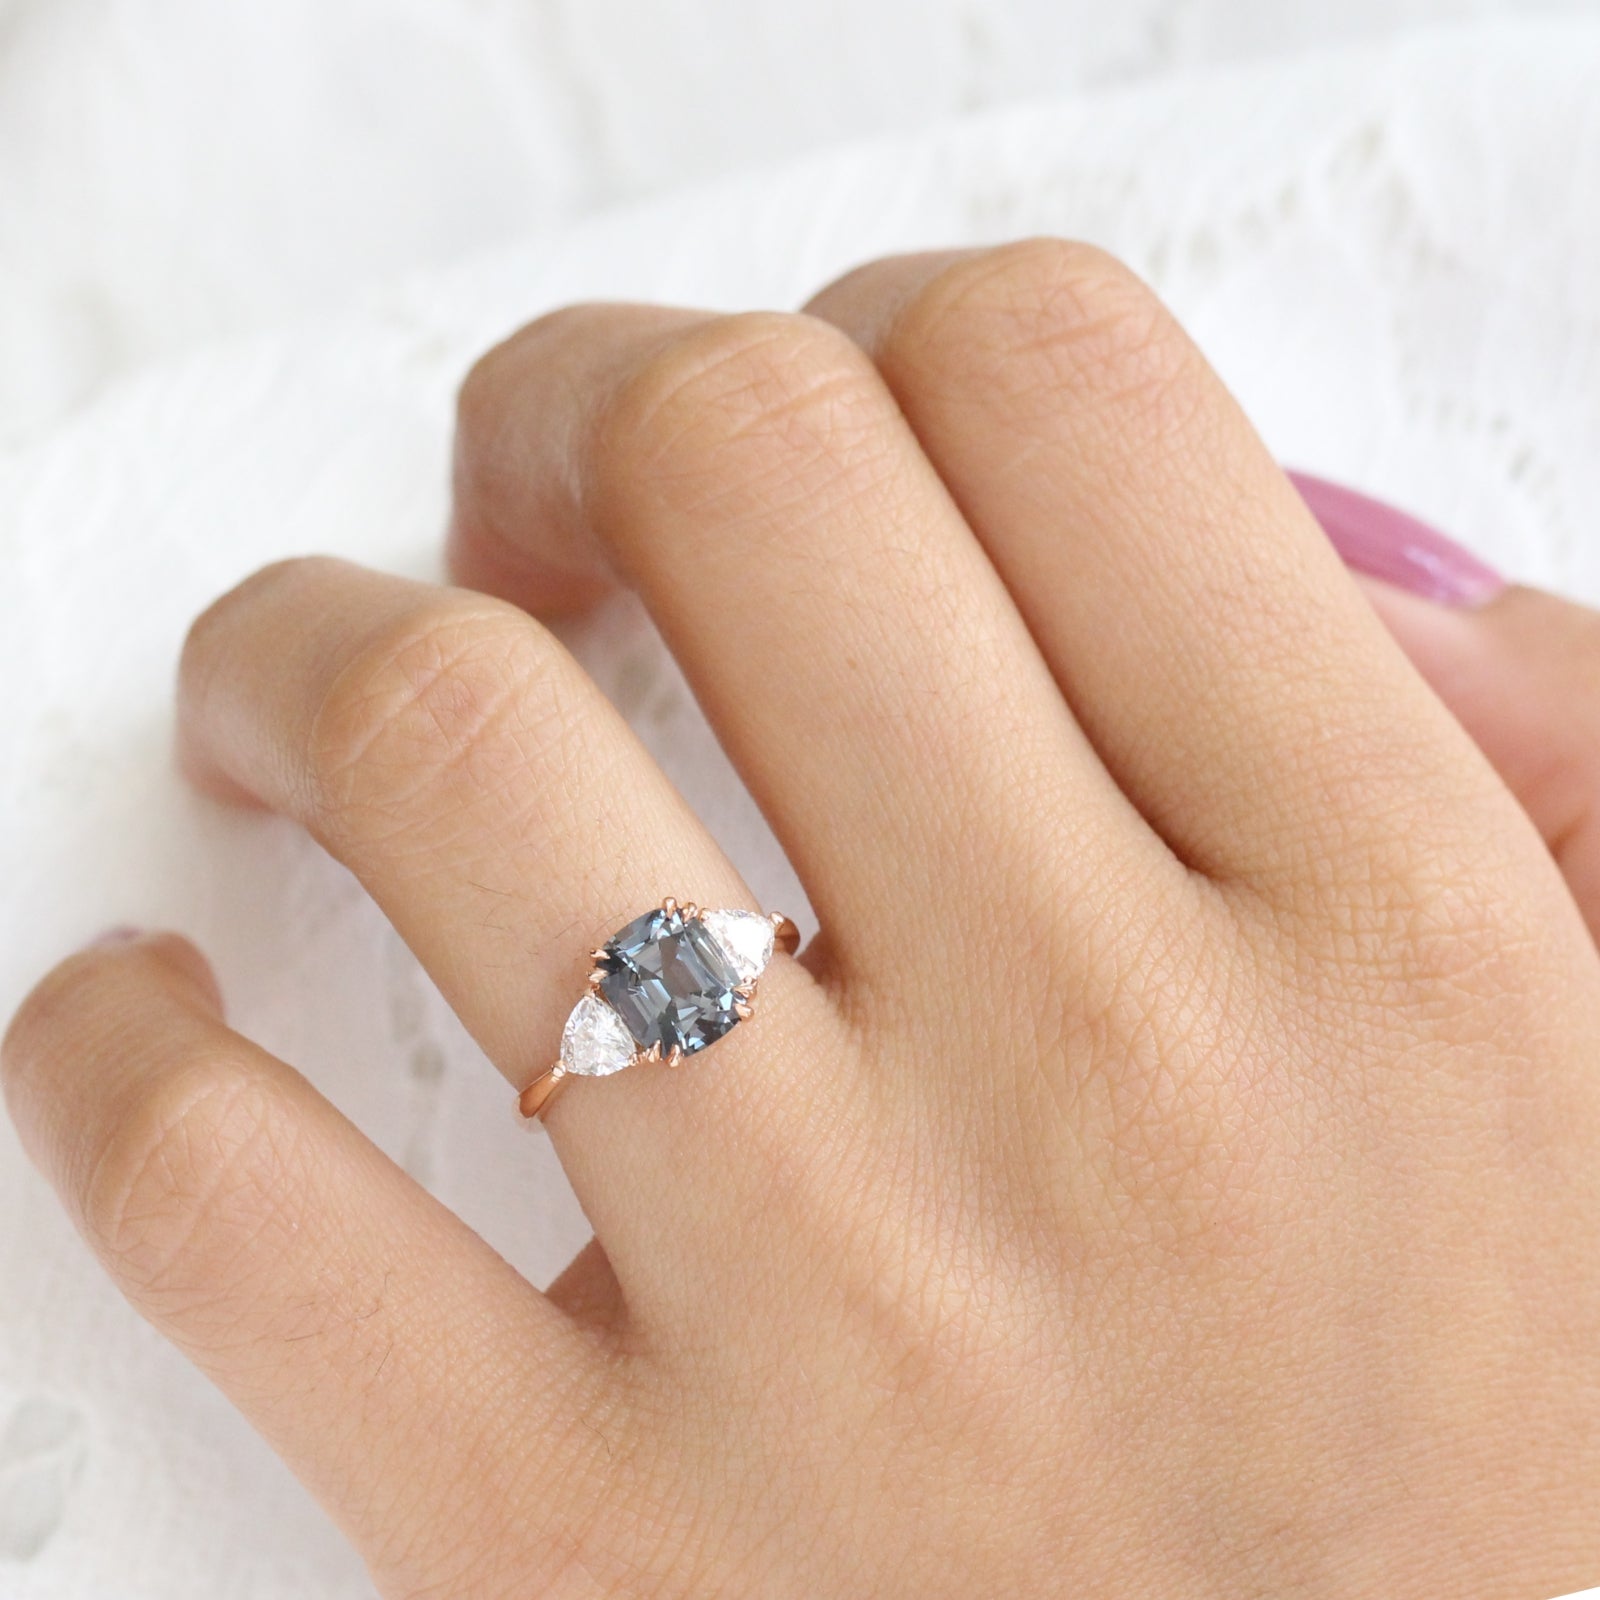 Grey Spinel Cushion Engagement Ring in Rose Gold 3 Stone Diamond Ring by La More Design Jewelry